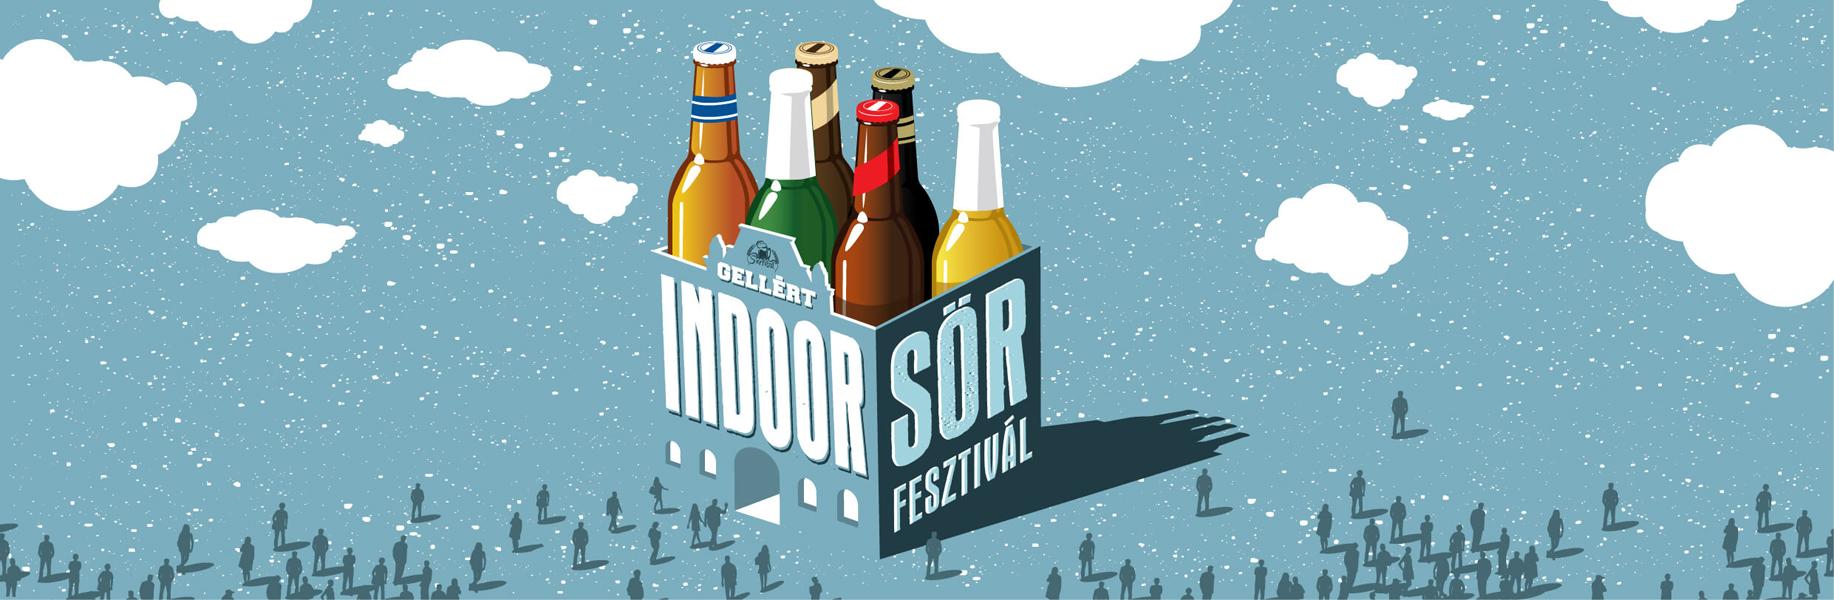 First Winter Beer Festival In Budapest, 19 - 21 February